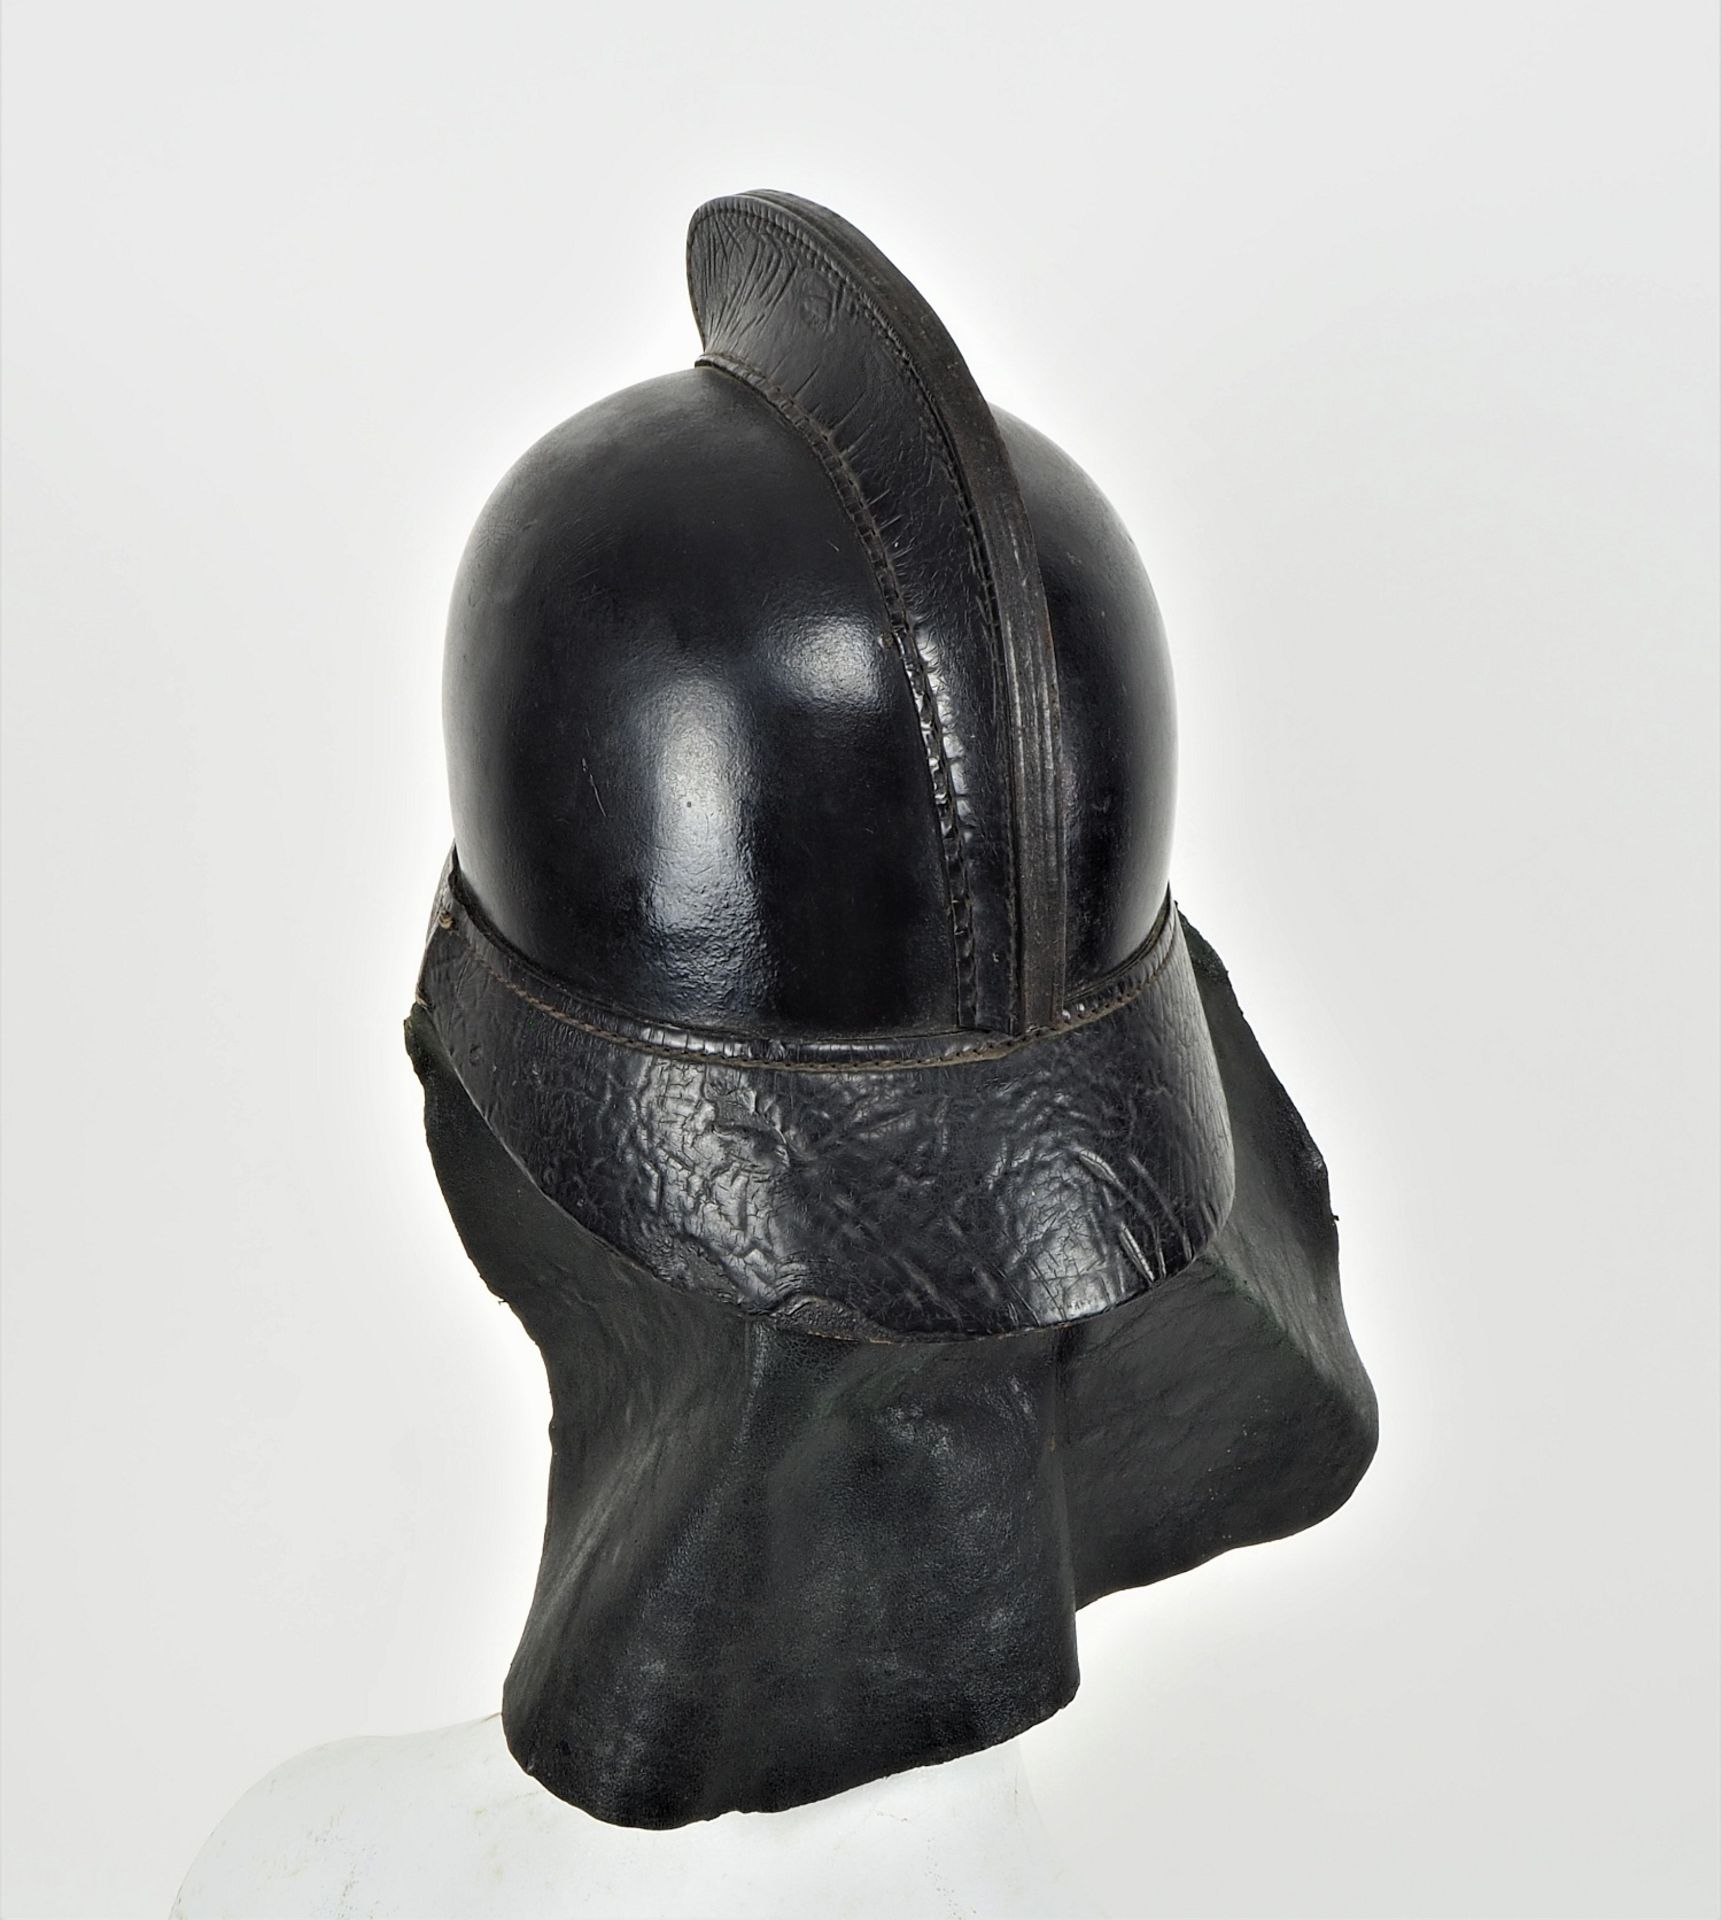 Leather fire helmet at 1900, probably South Germany (German Empire) - Image 3 of 4